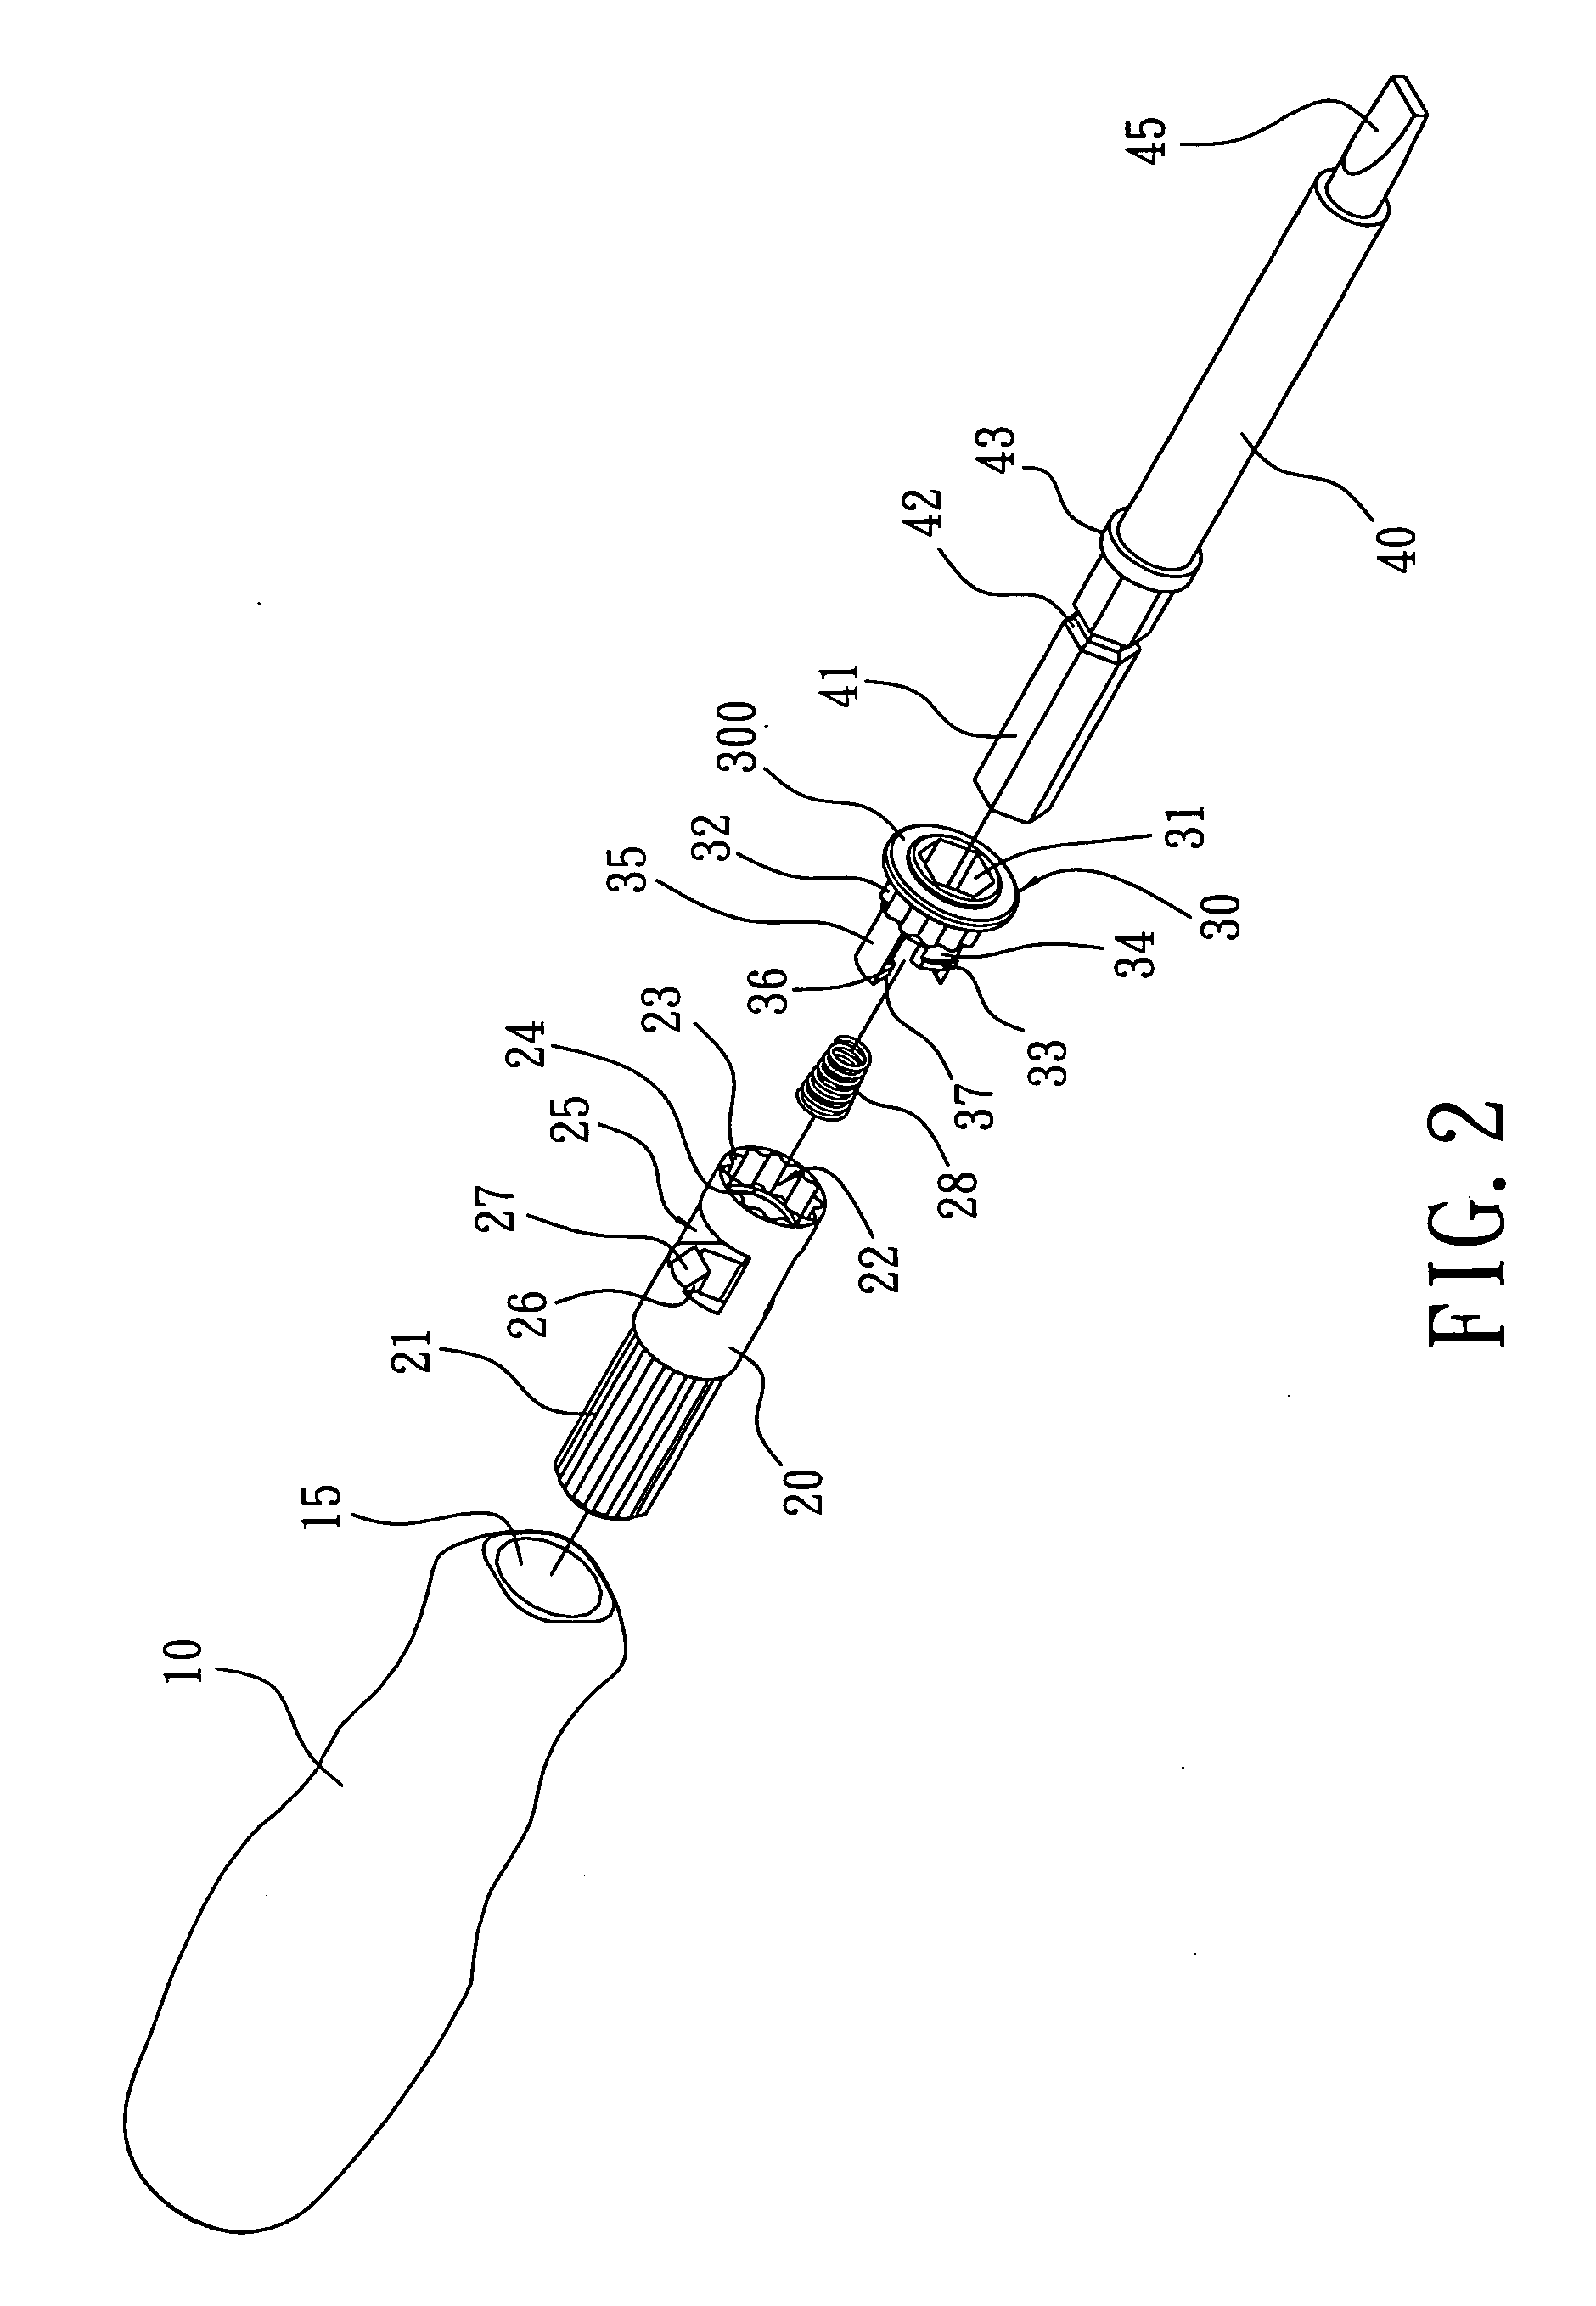 Screwdriver having quick release tool shank background of the invention